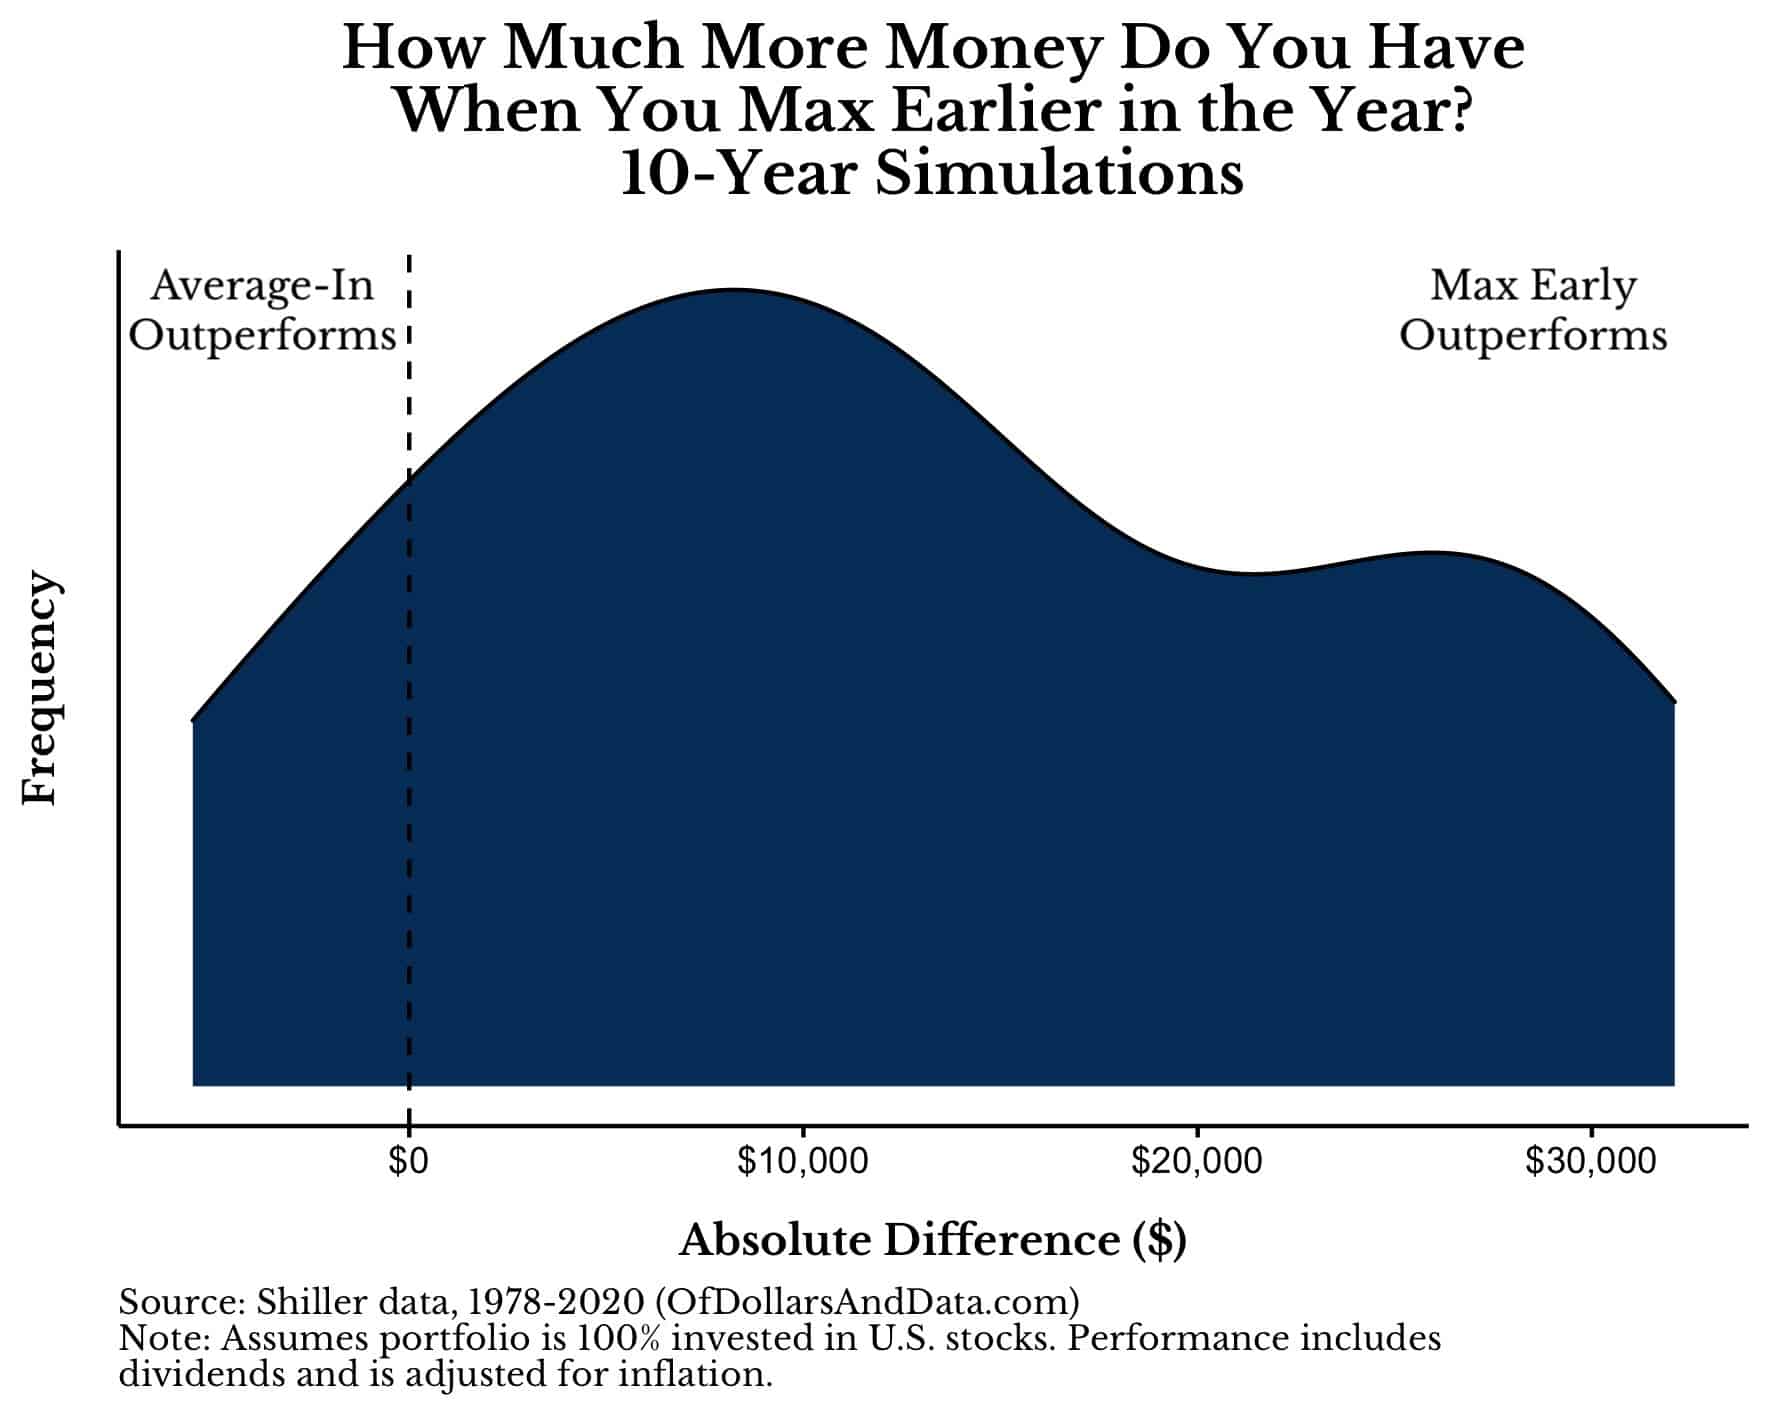 Distribution of simulated outperformance when you max out your 401k earlier in the year for 10 years in a row.